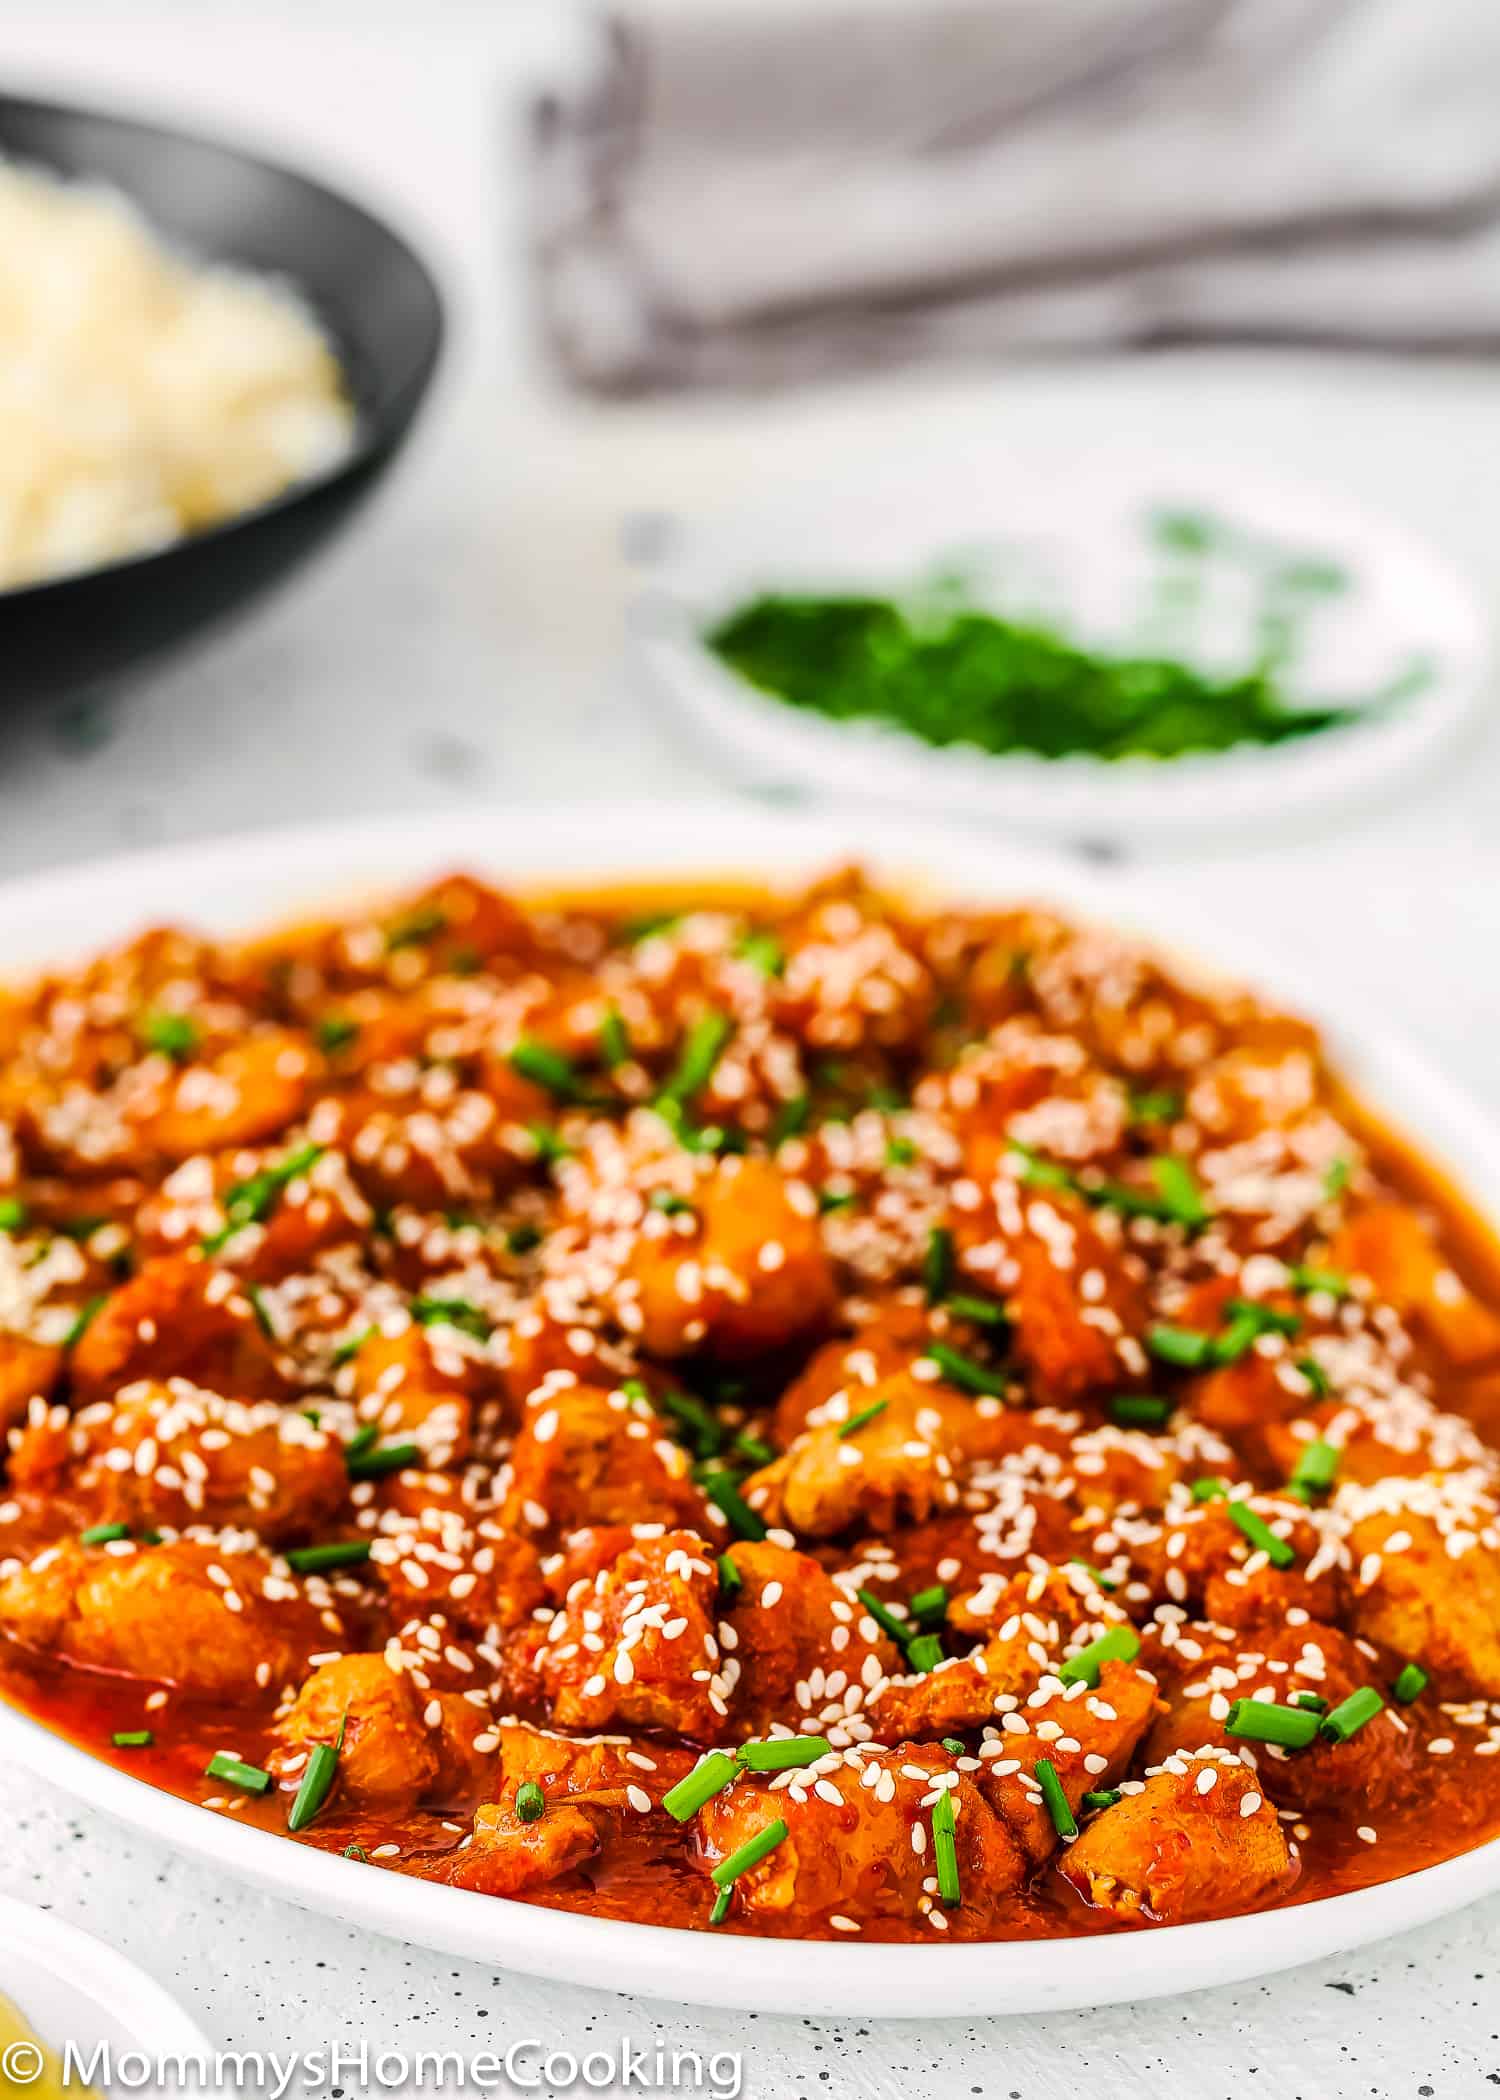 Korean Kimchi Chicken with sesame seeds and green onions on a plate.